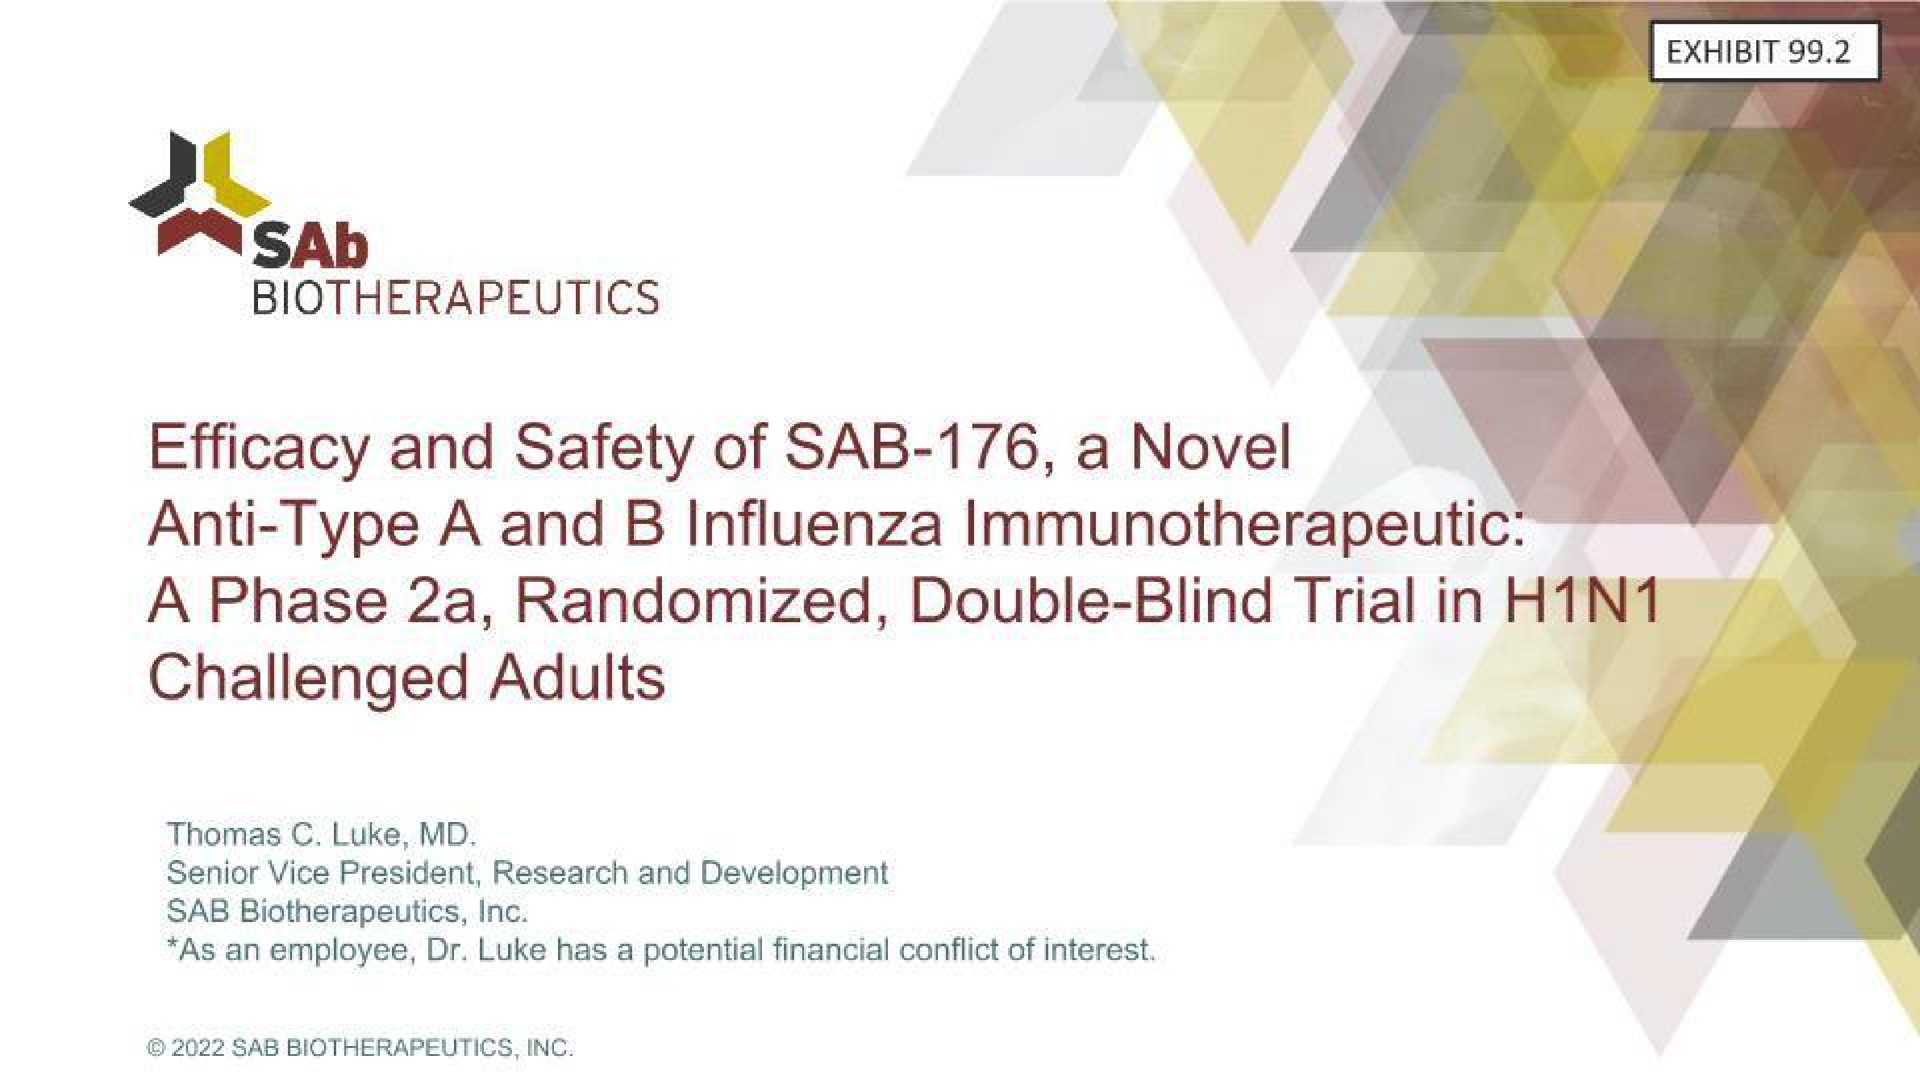 efficacy and safety of sab a novel anti type a and influenza a phase a randomized double blind challenged adults | SAB Biotherapeutics